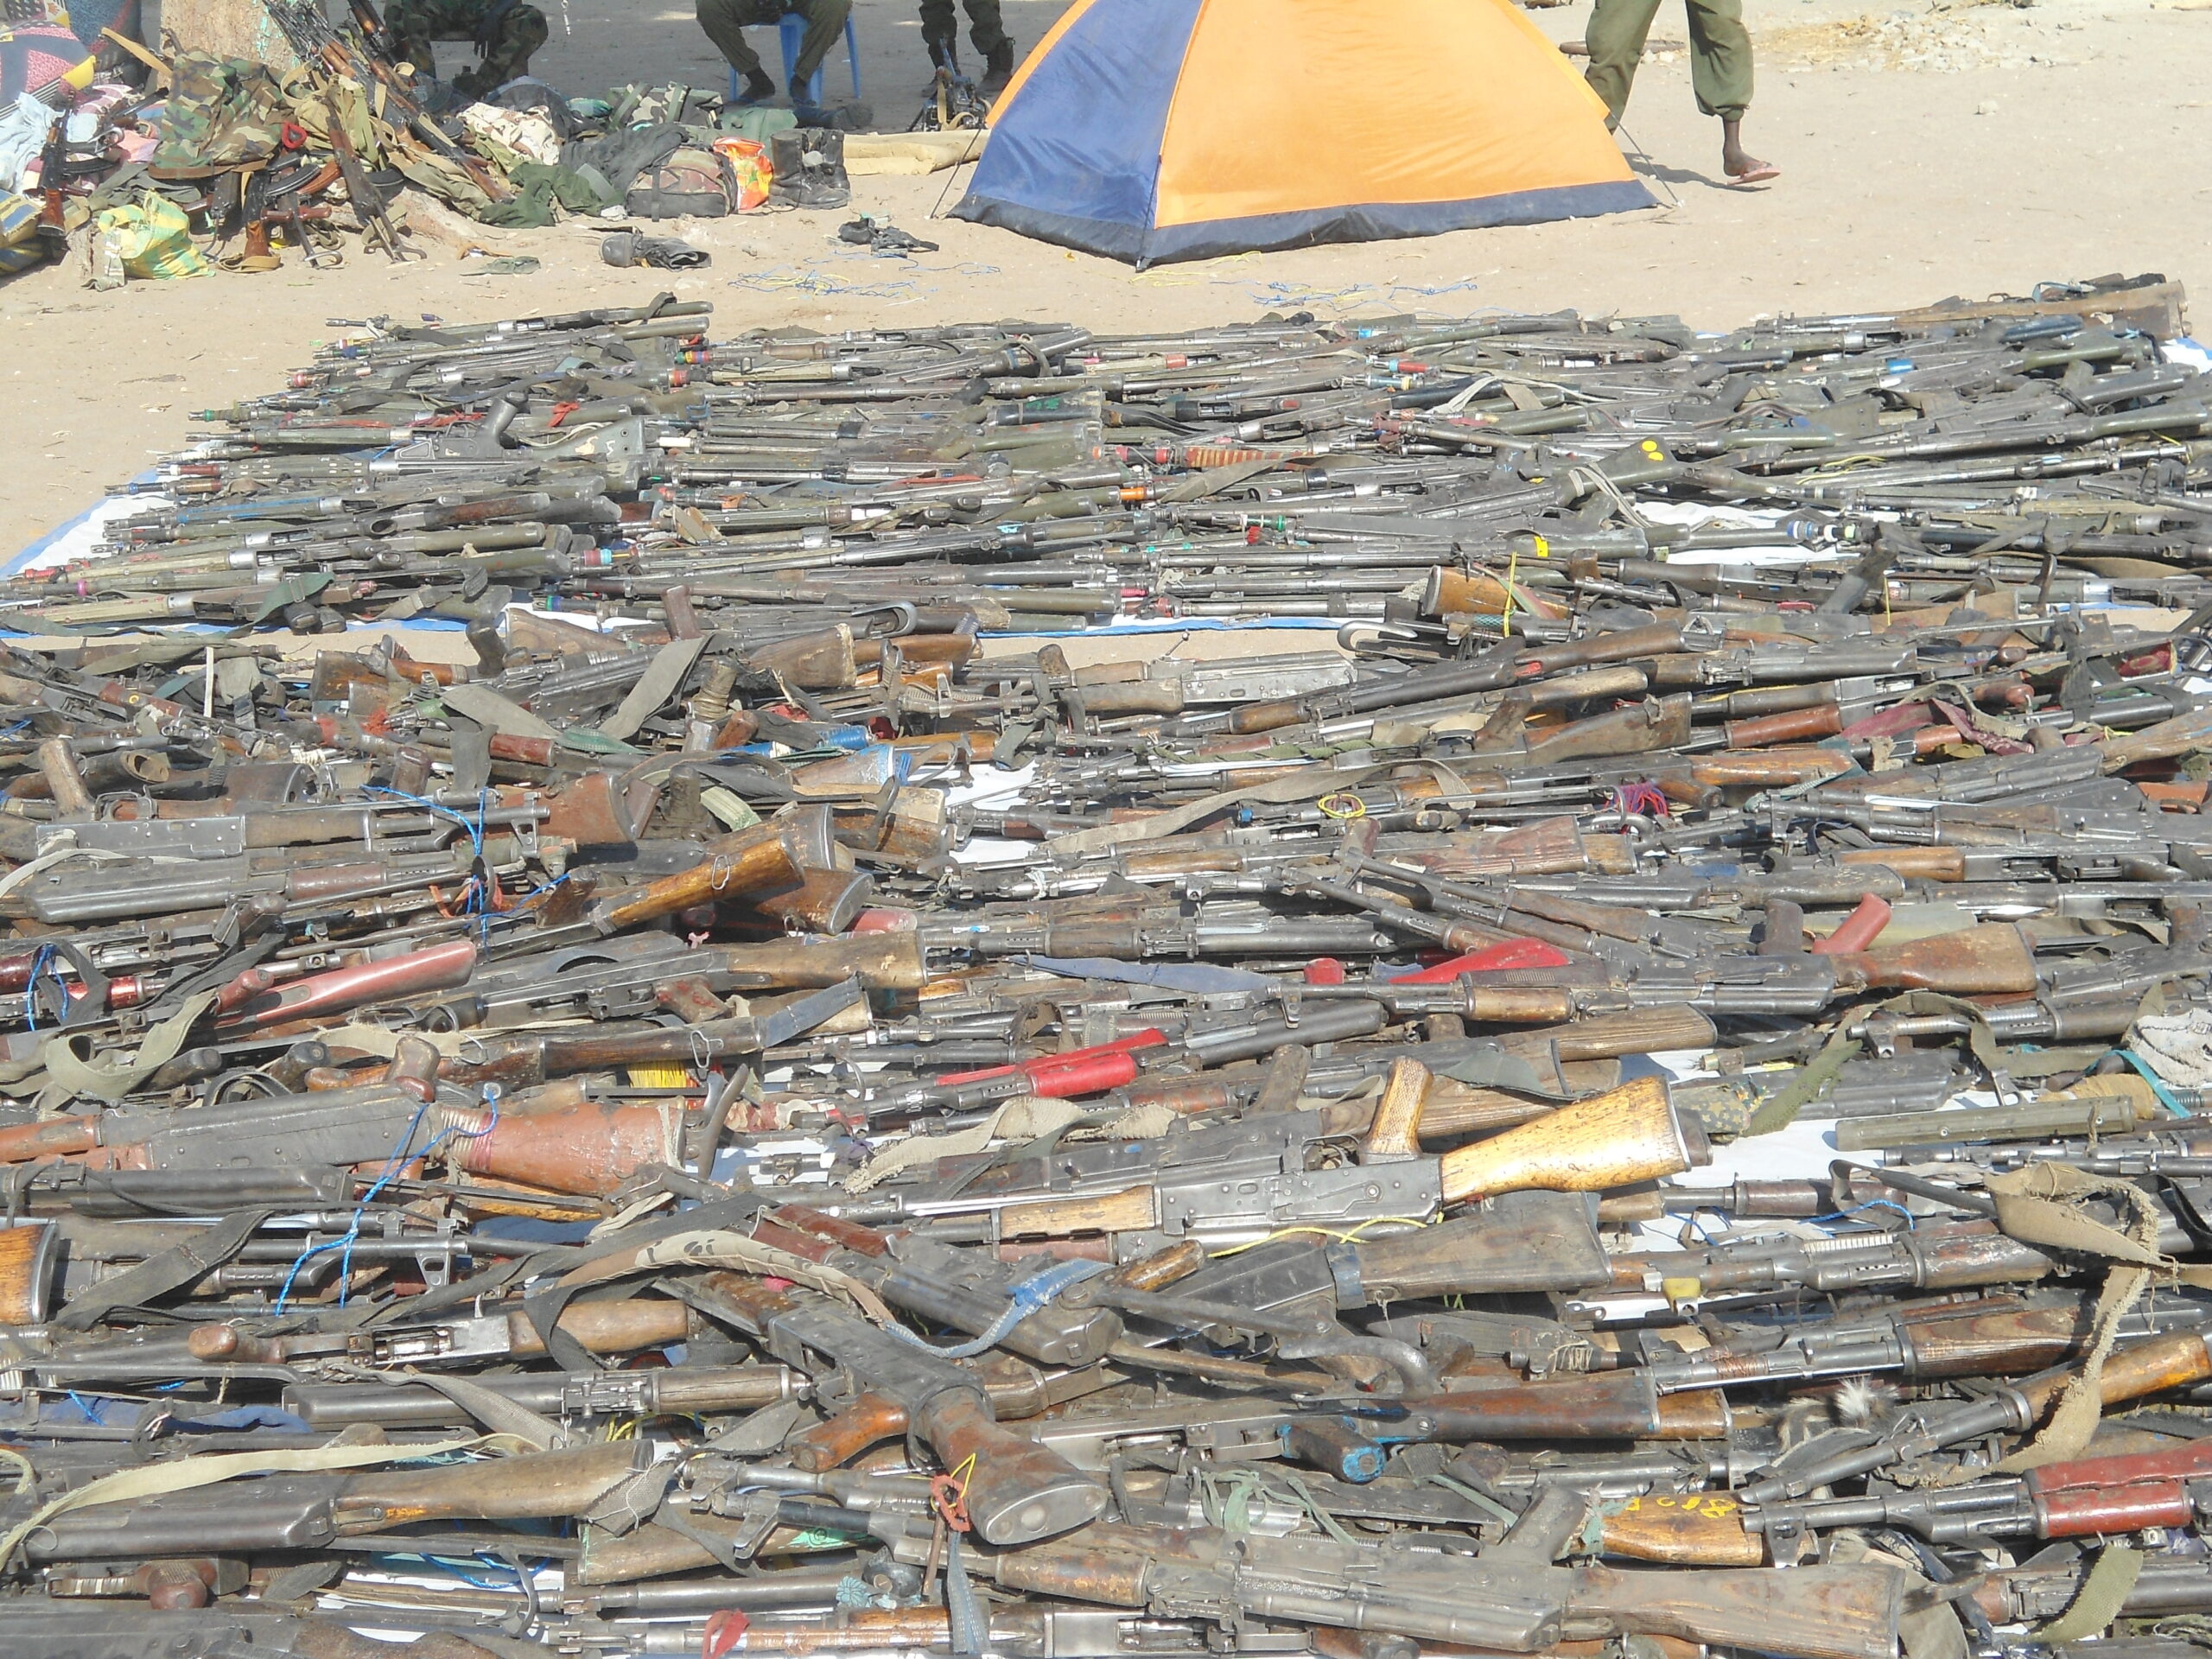 Weapons collected from Pibor County during the Jonglei State, displayed at Malualchat SPLA camp. 2 April 2012 (ST)